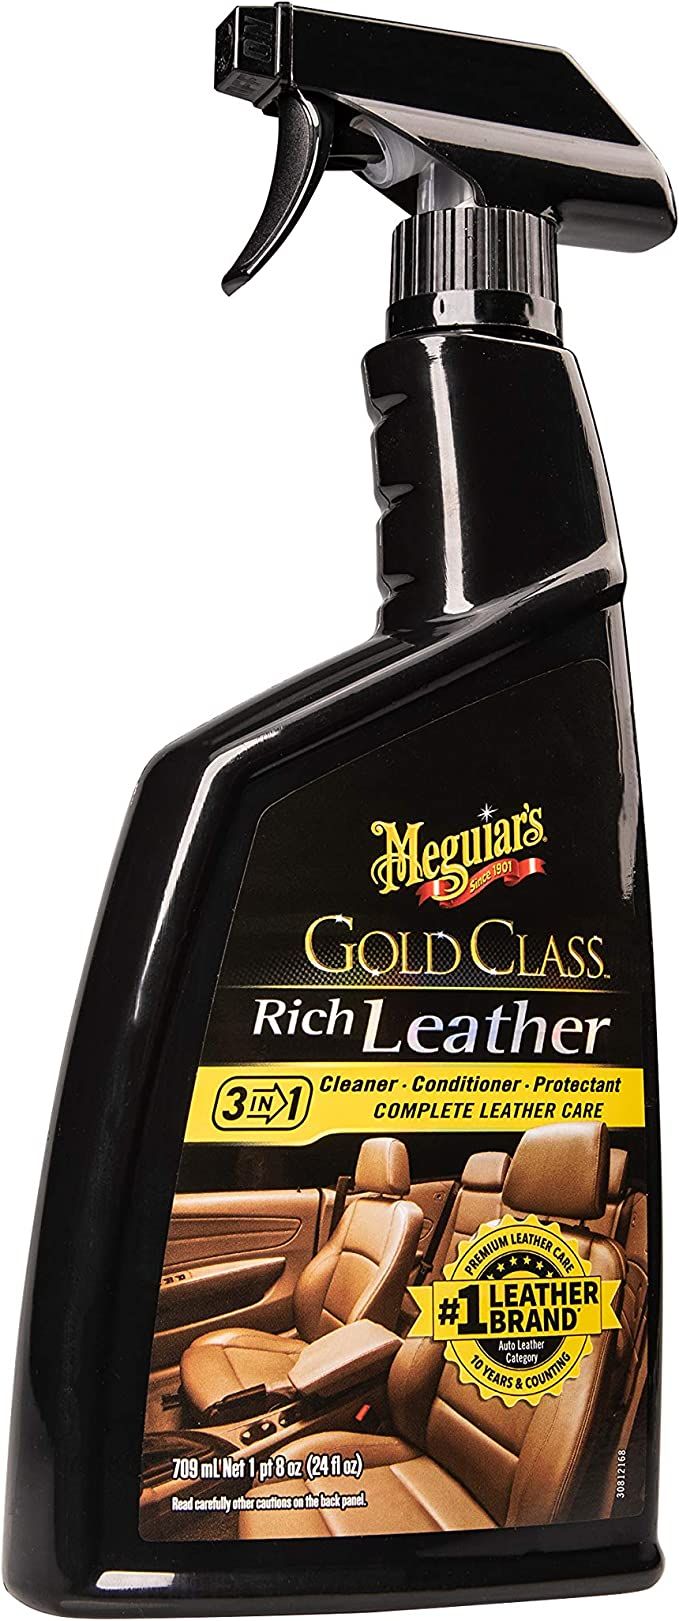 Meguiar's G10924SP Gold Class Rich Leather Cleaner and Conditioning Spray, 24 Fluid Ounces, Black | Amazon (US)